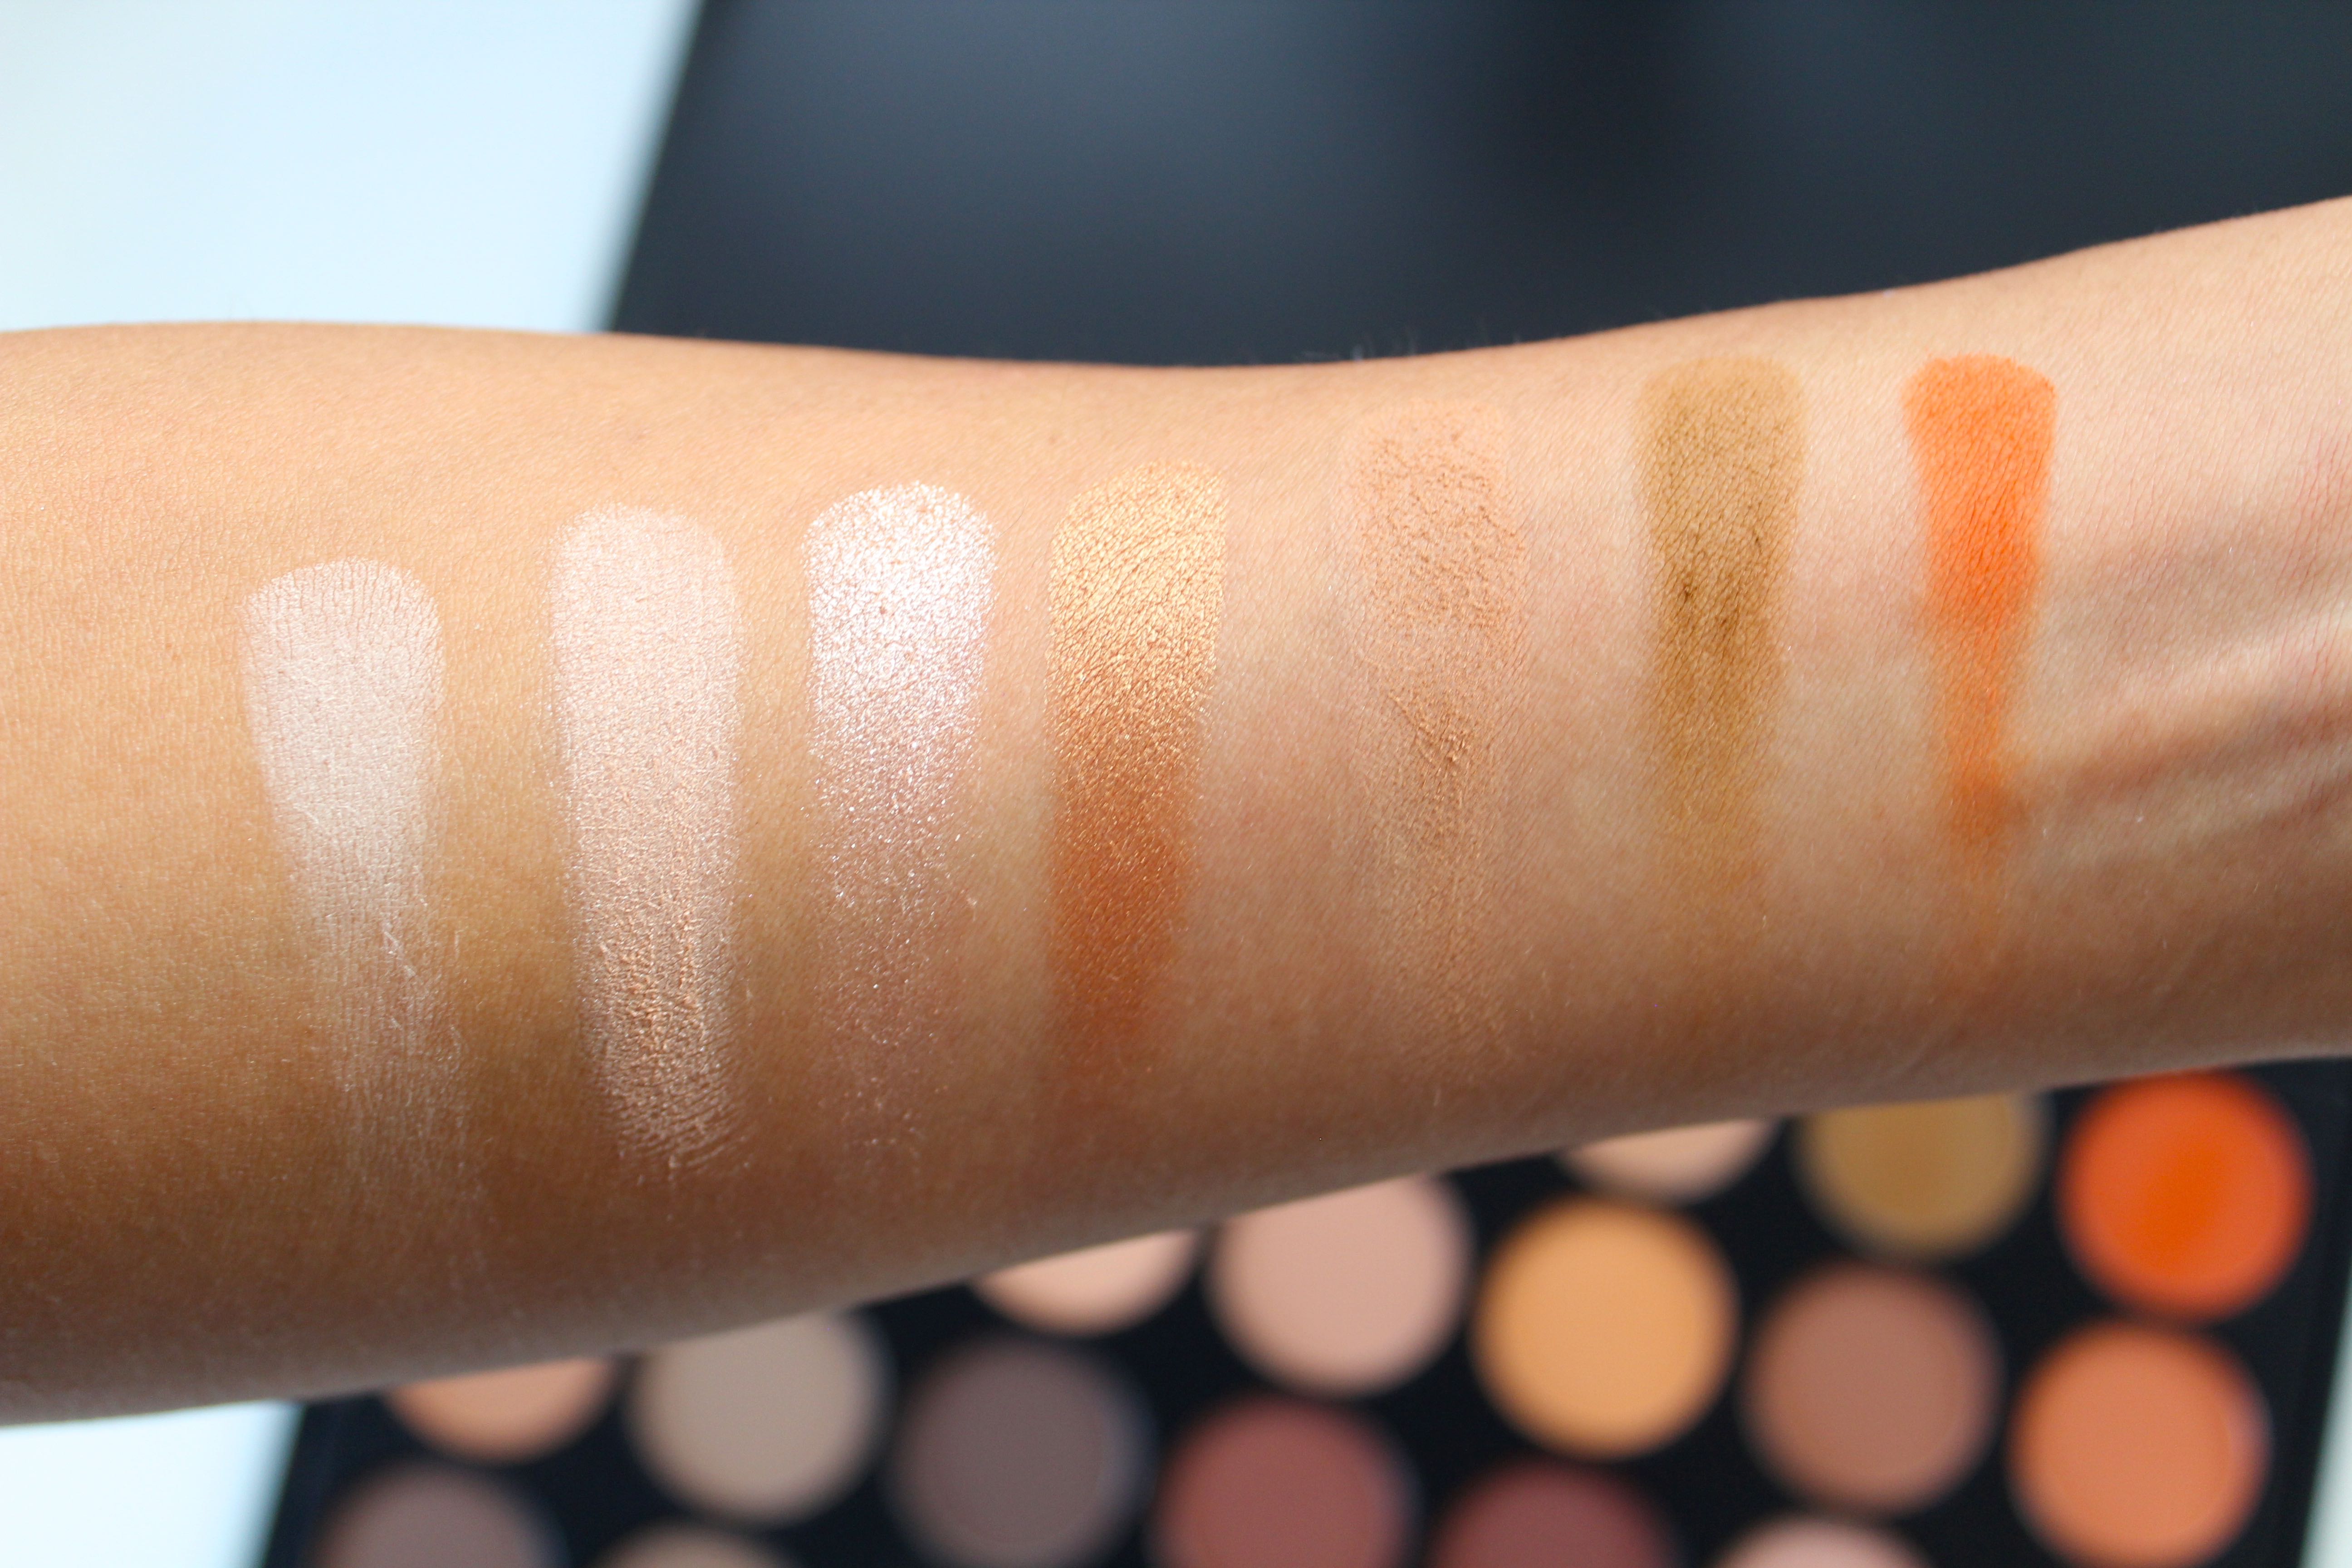 Morphe Brushes 35O Nature Glow Eyeshadow Palette - Review & Swatches by Face Made Up